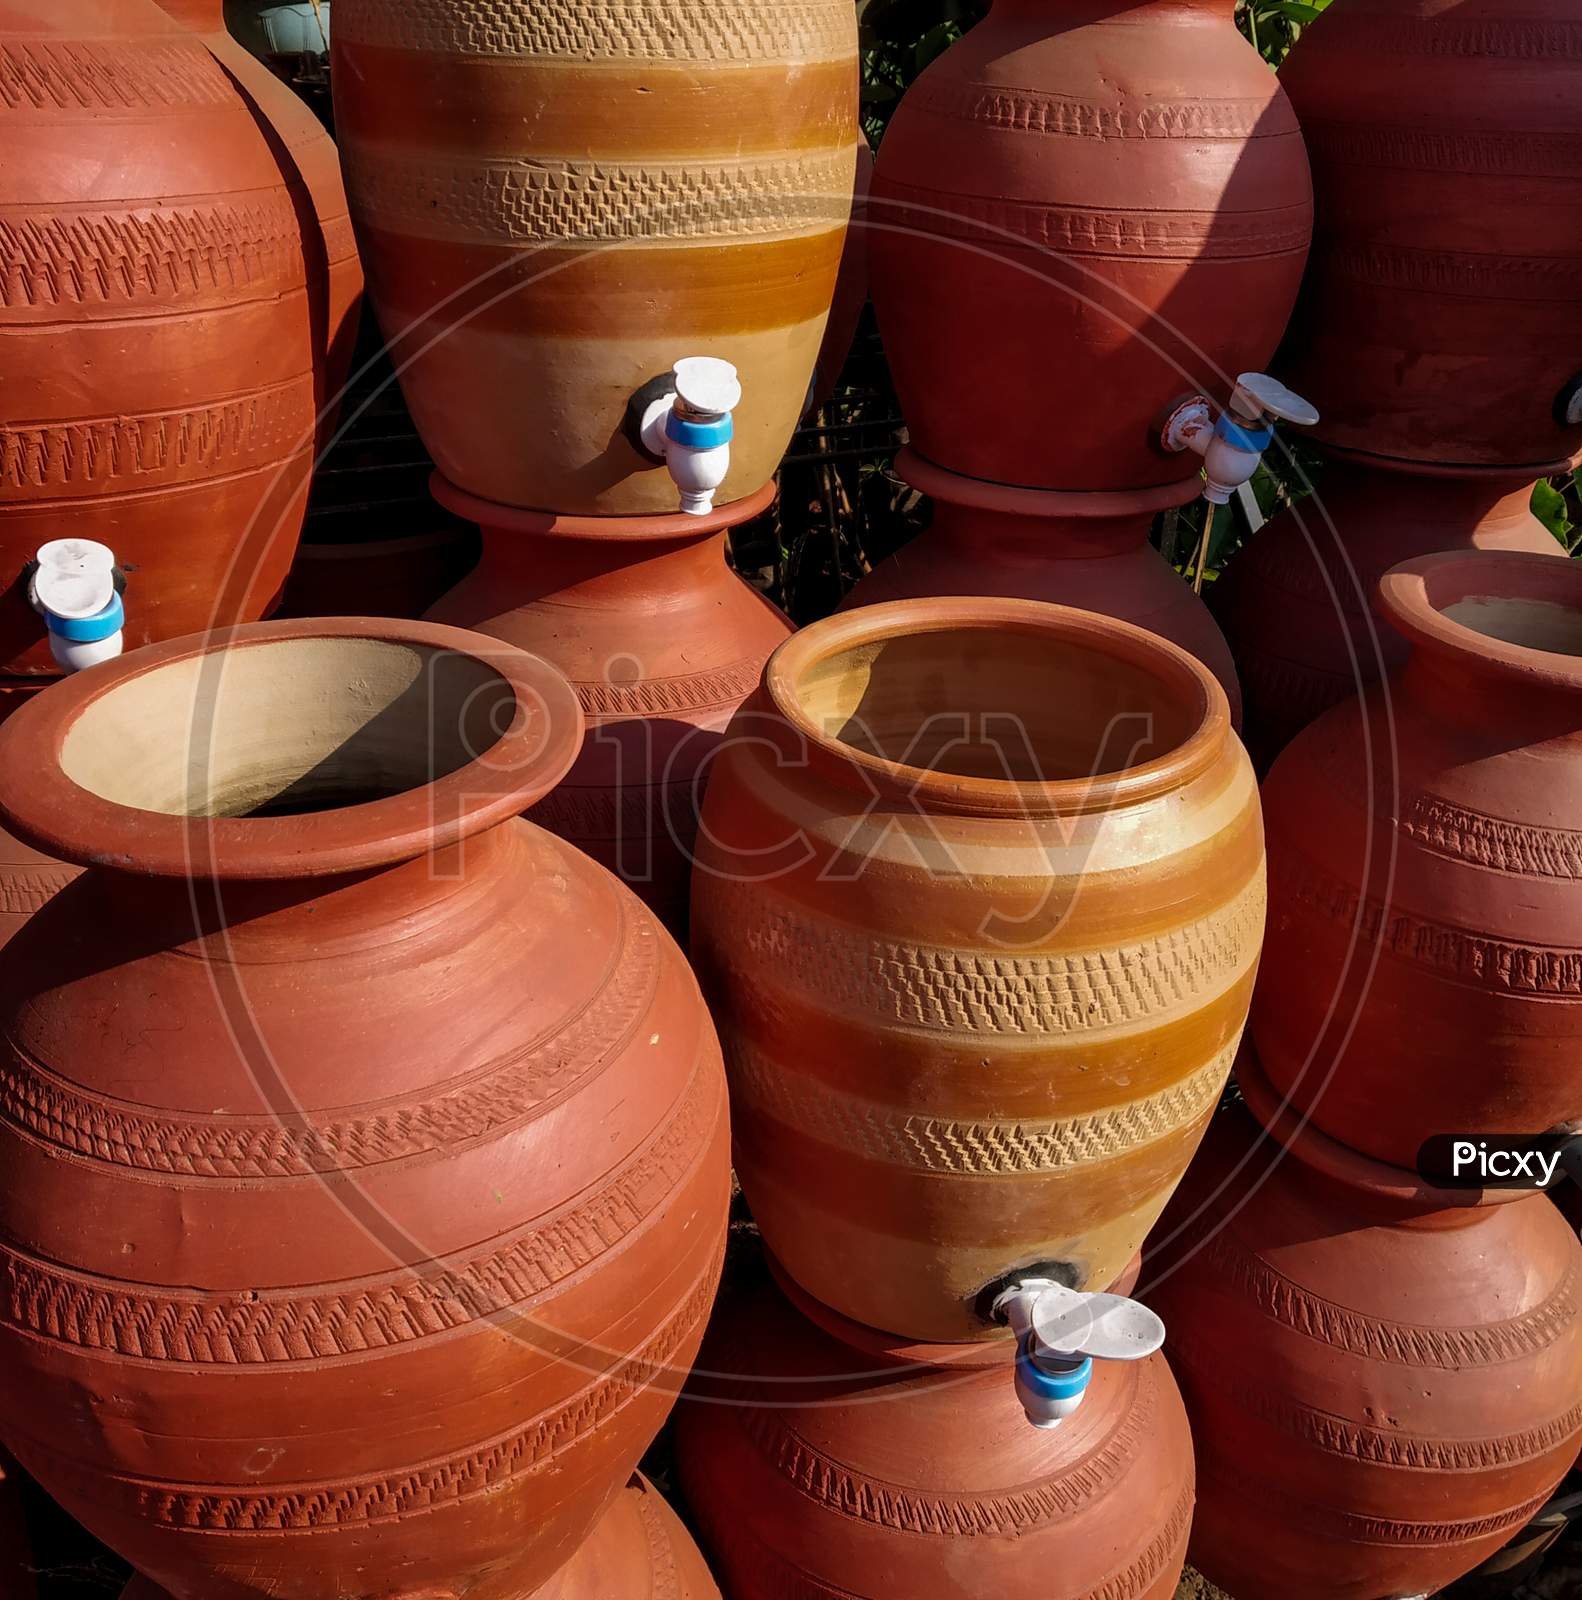 Pottery Plant With Many Ready Brown Pots Of Clay With Taps For Drinking Water.